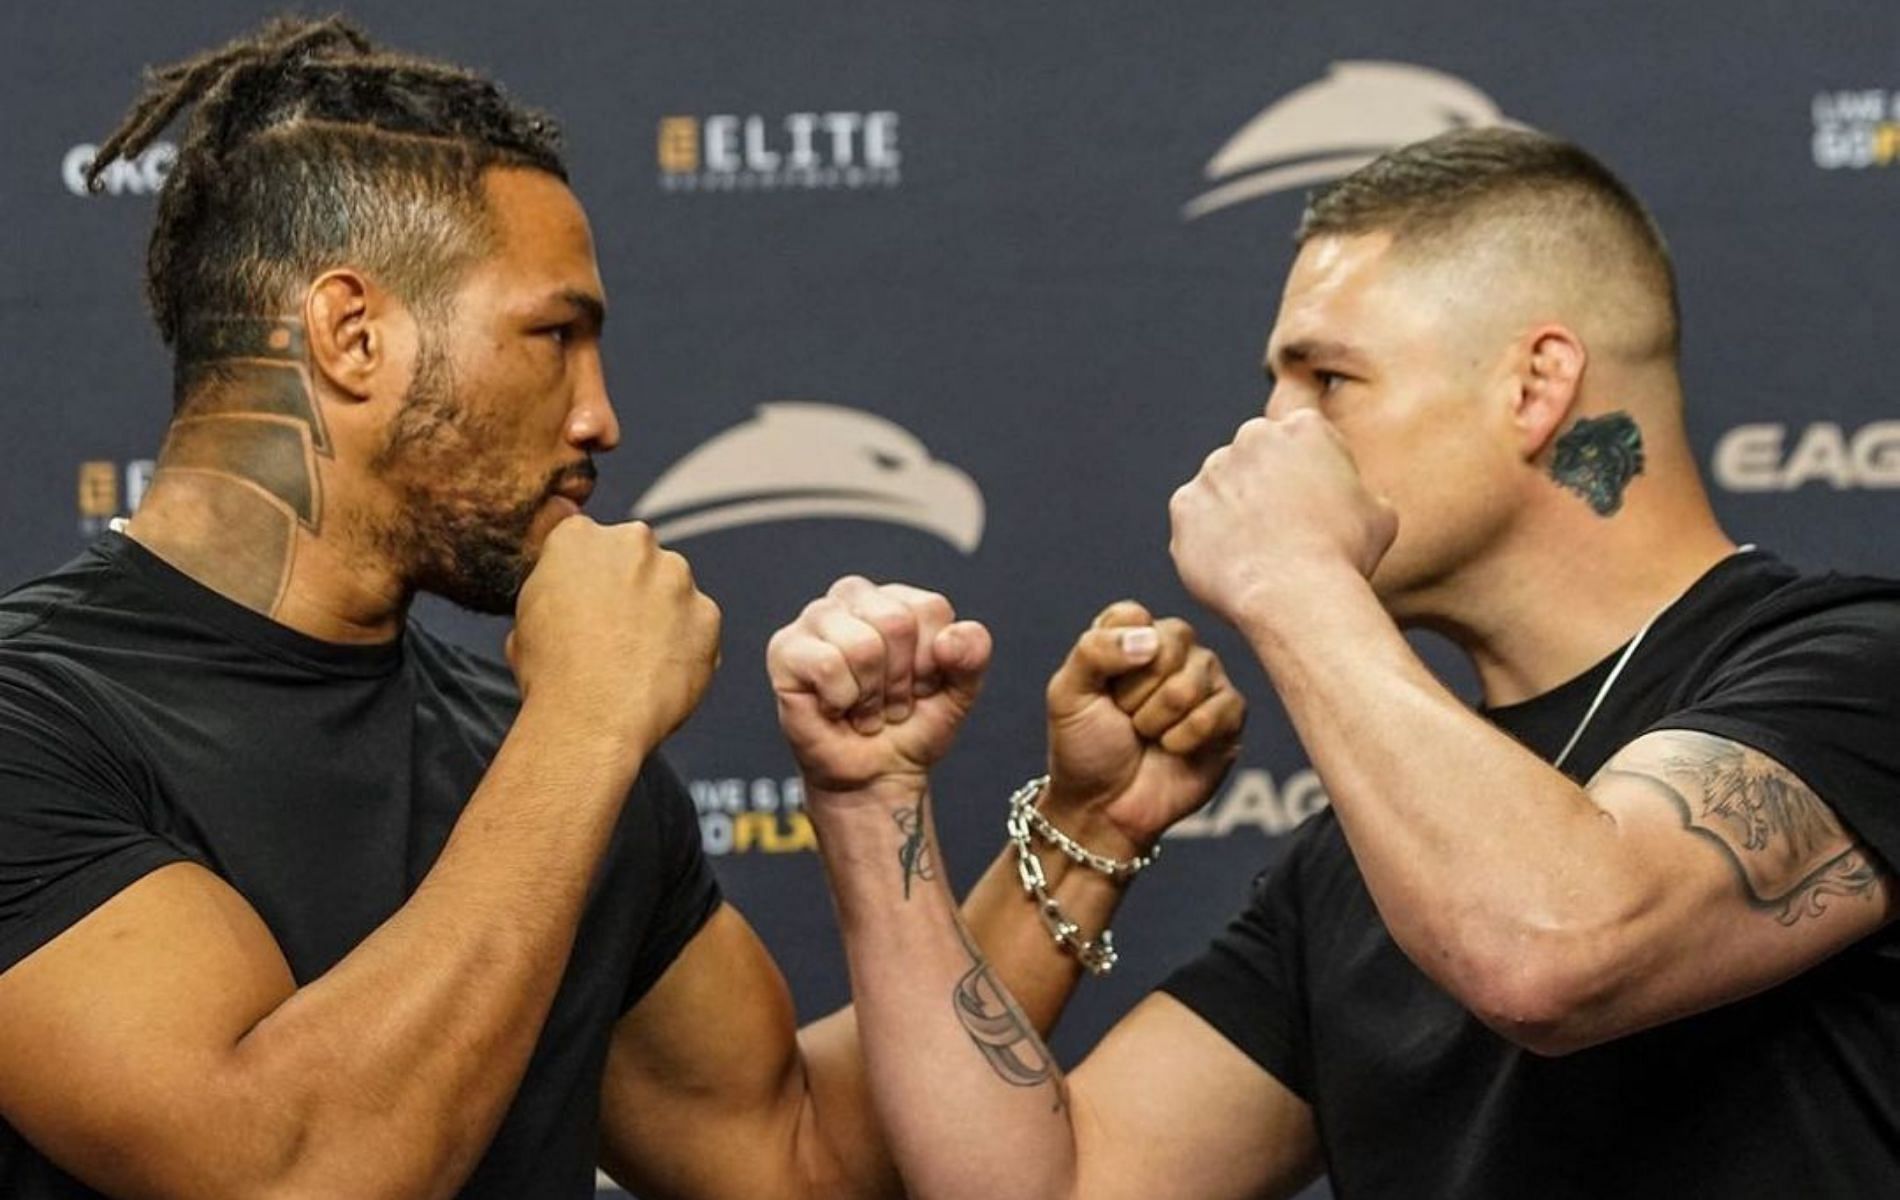 Eagle FC 46: Who won the fight between Diego Sanchez and Kevin Lee (11th  March 2022)?